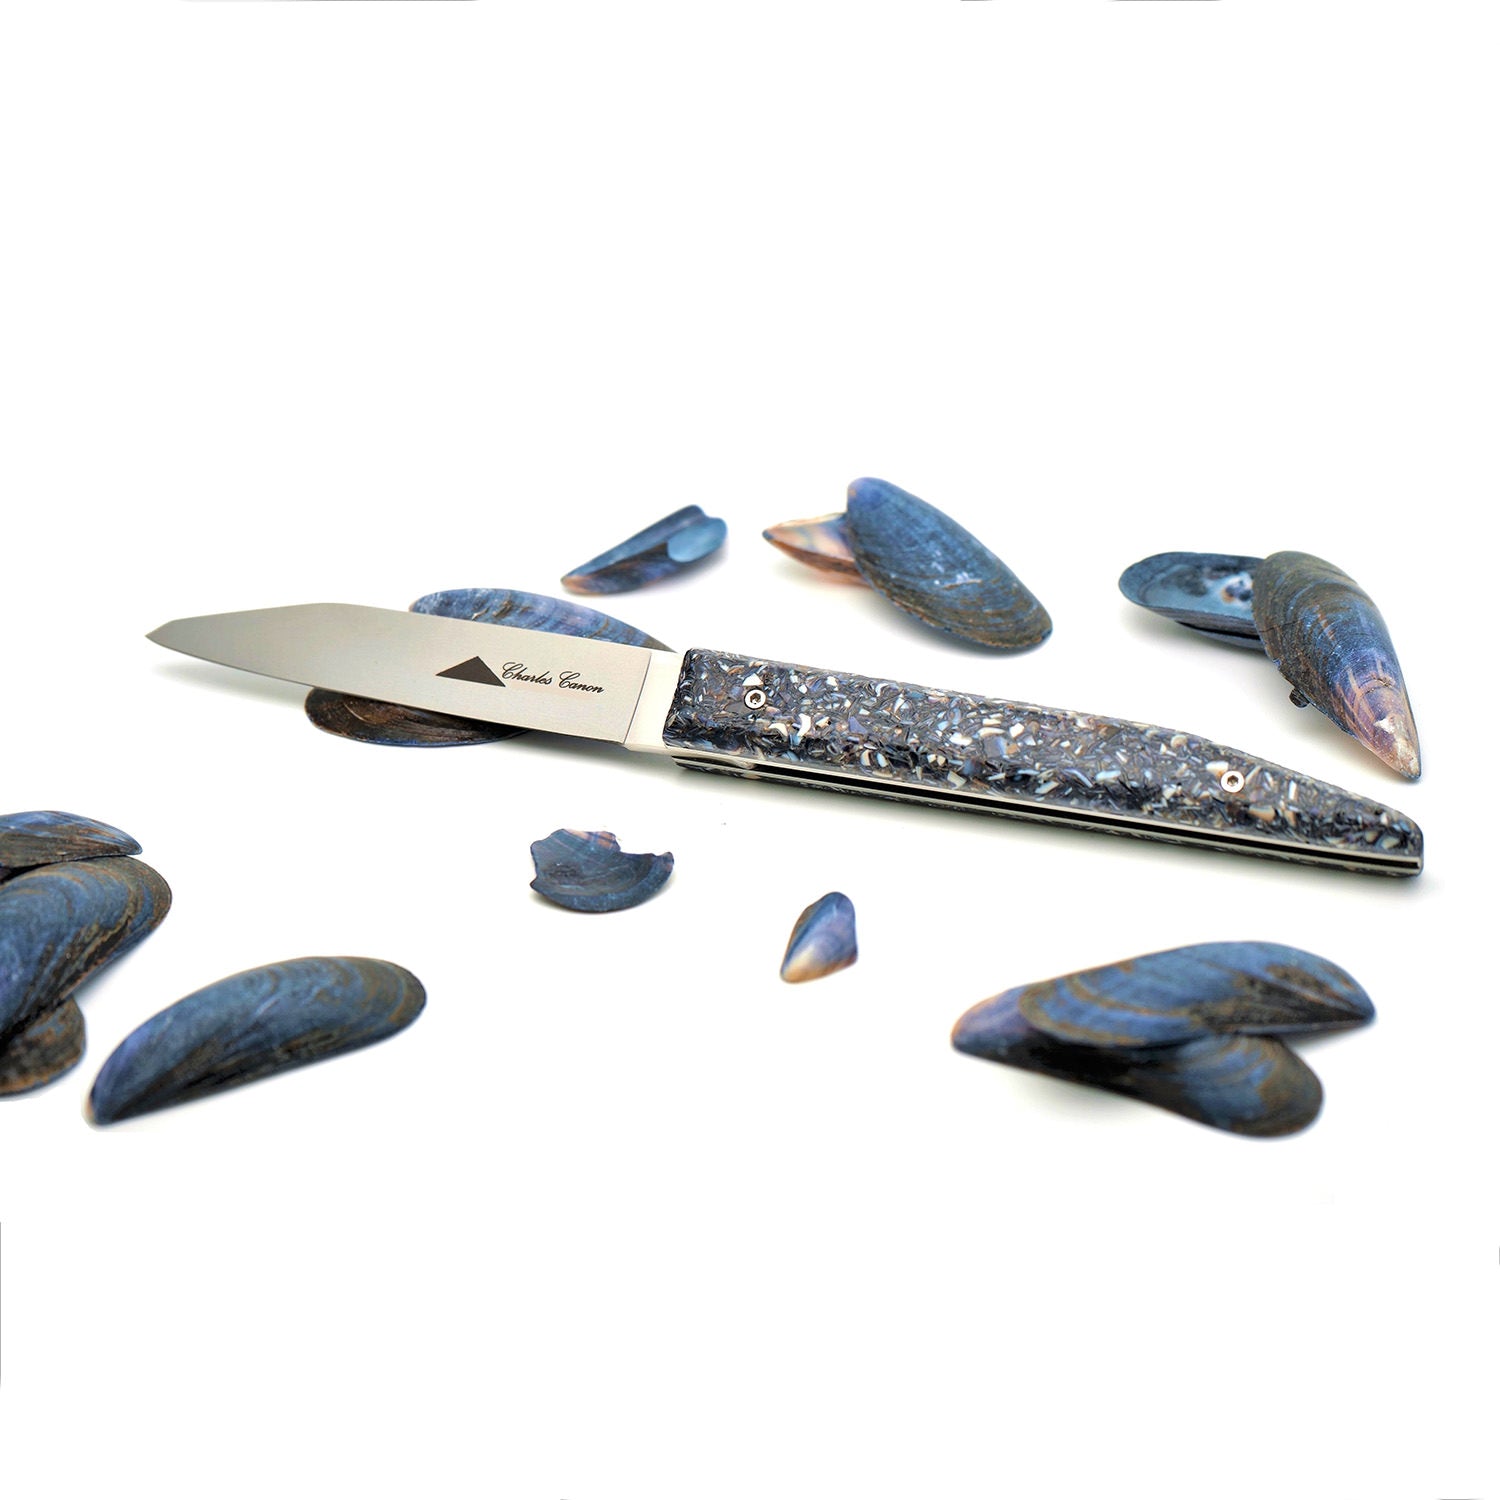 Knife handle made from recycled mussel shells